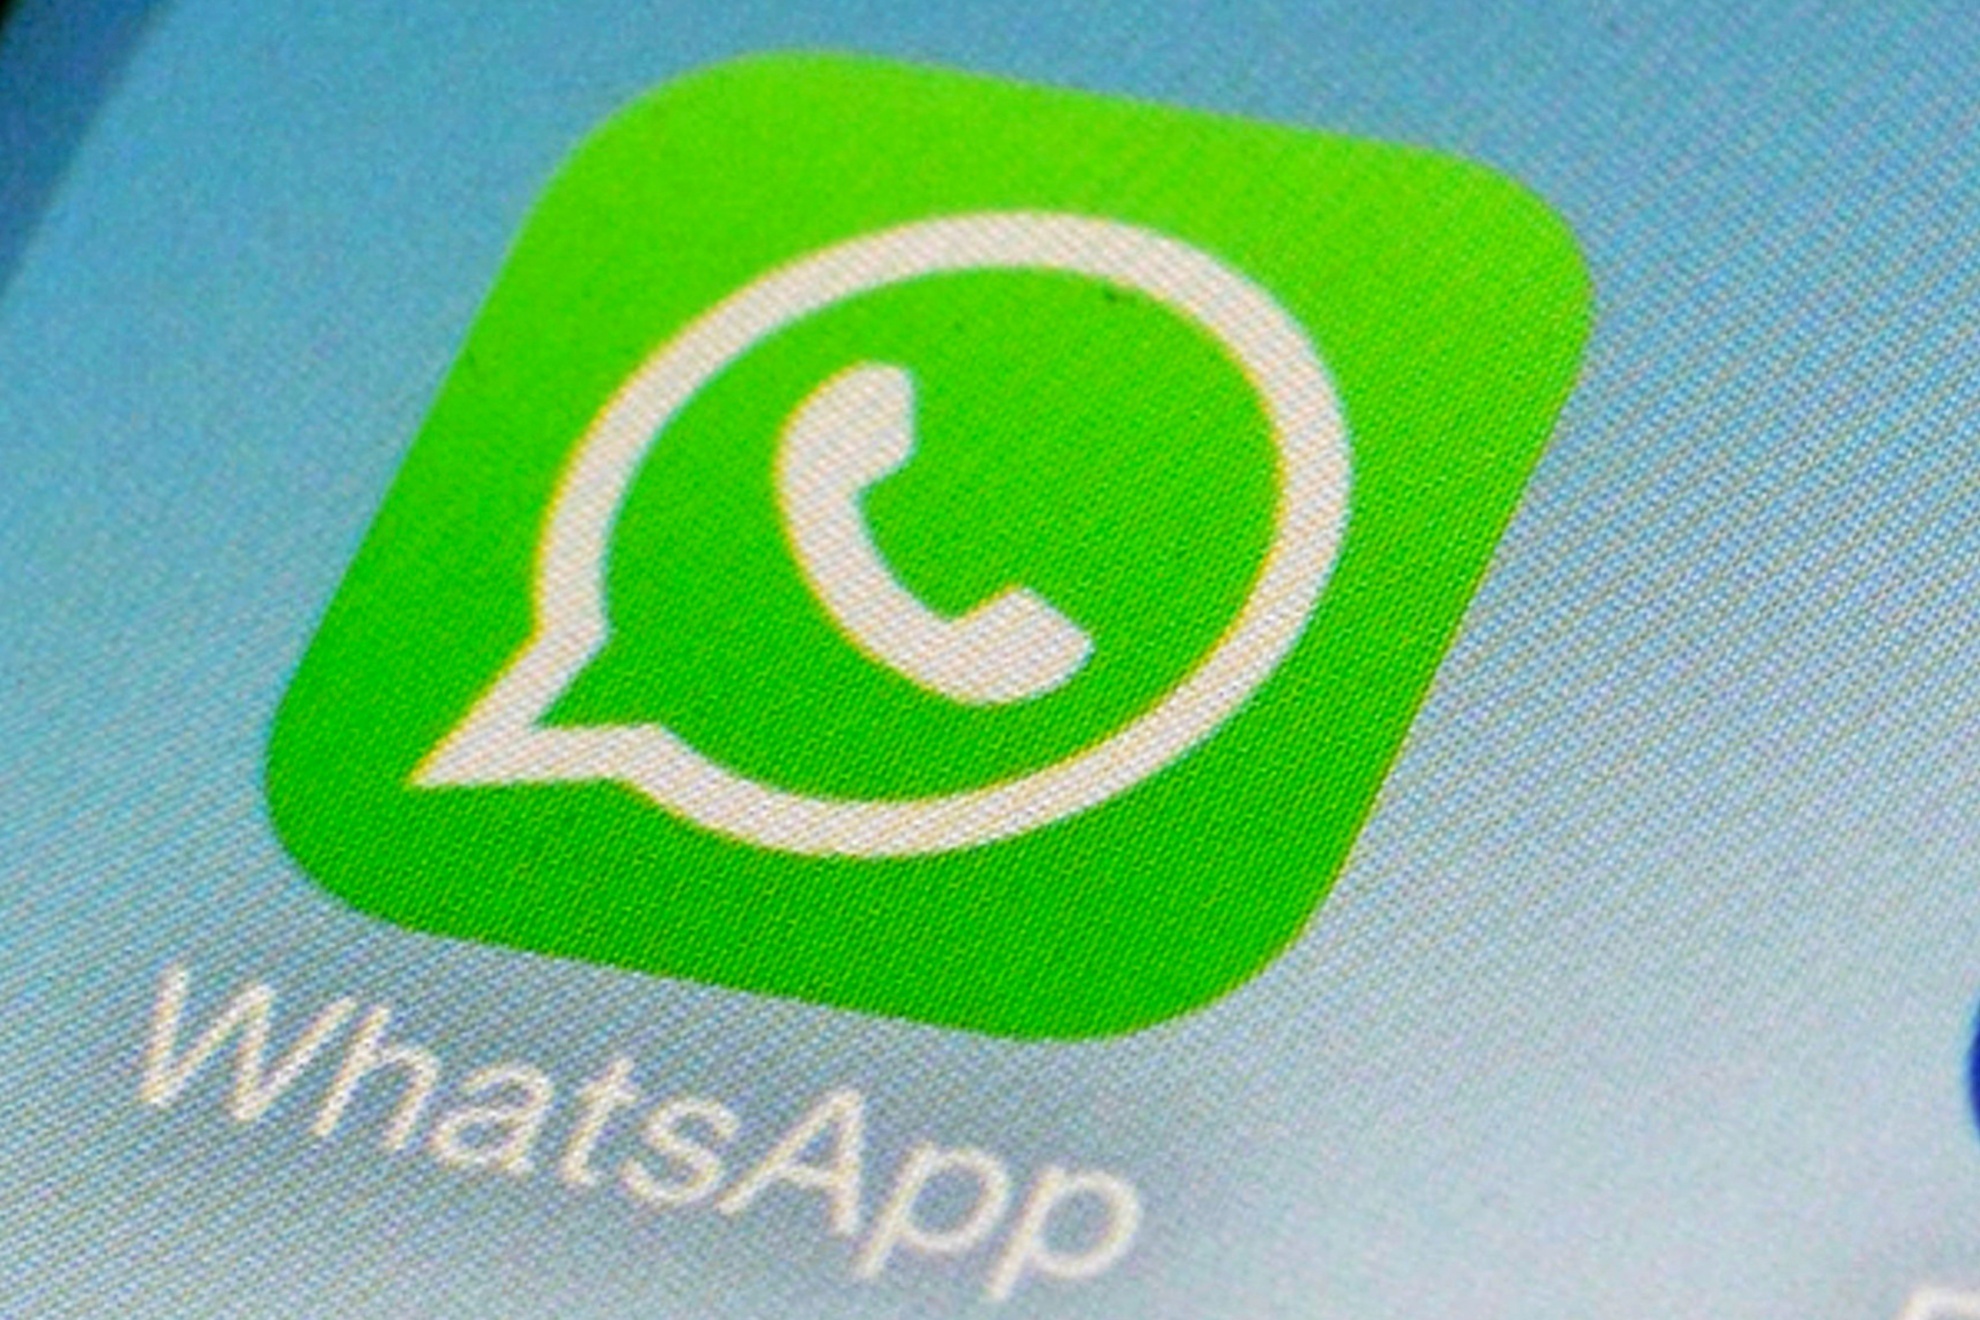 WhatsApp Down: Users around the world report problems with the Meta app